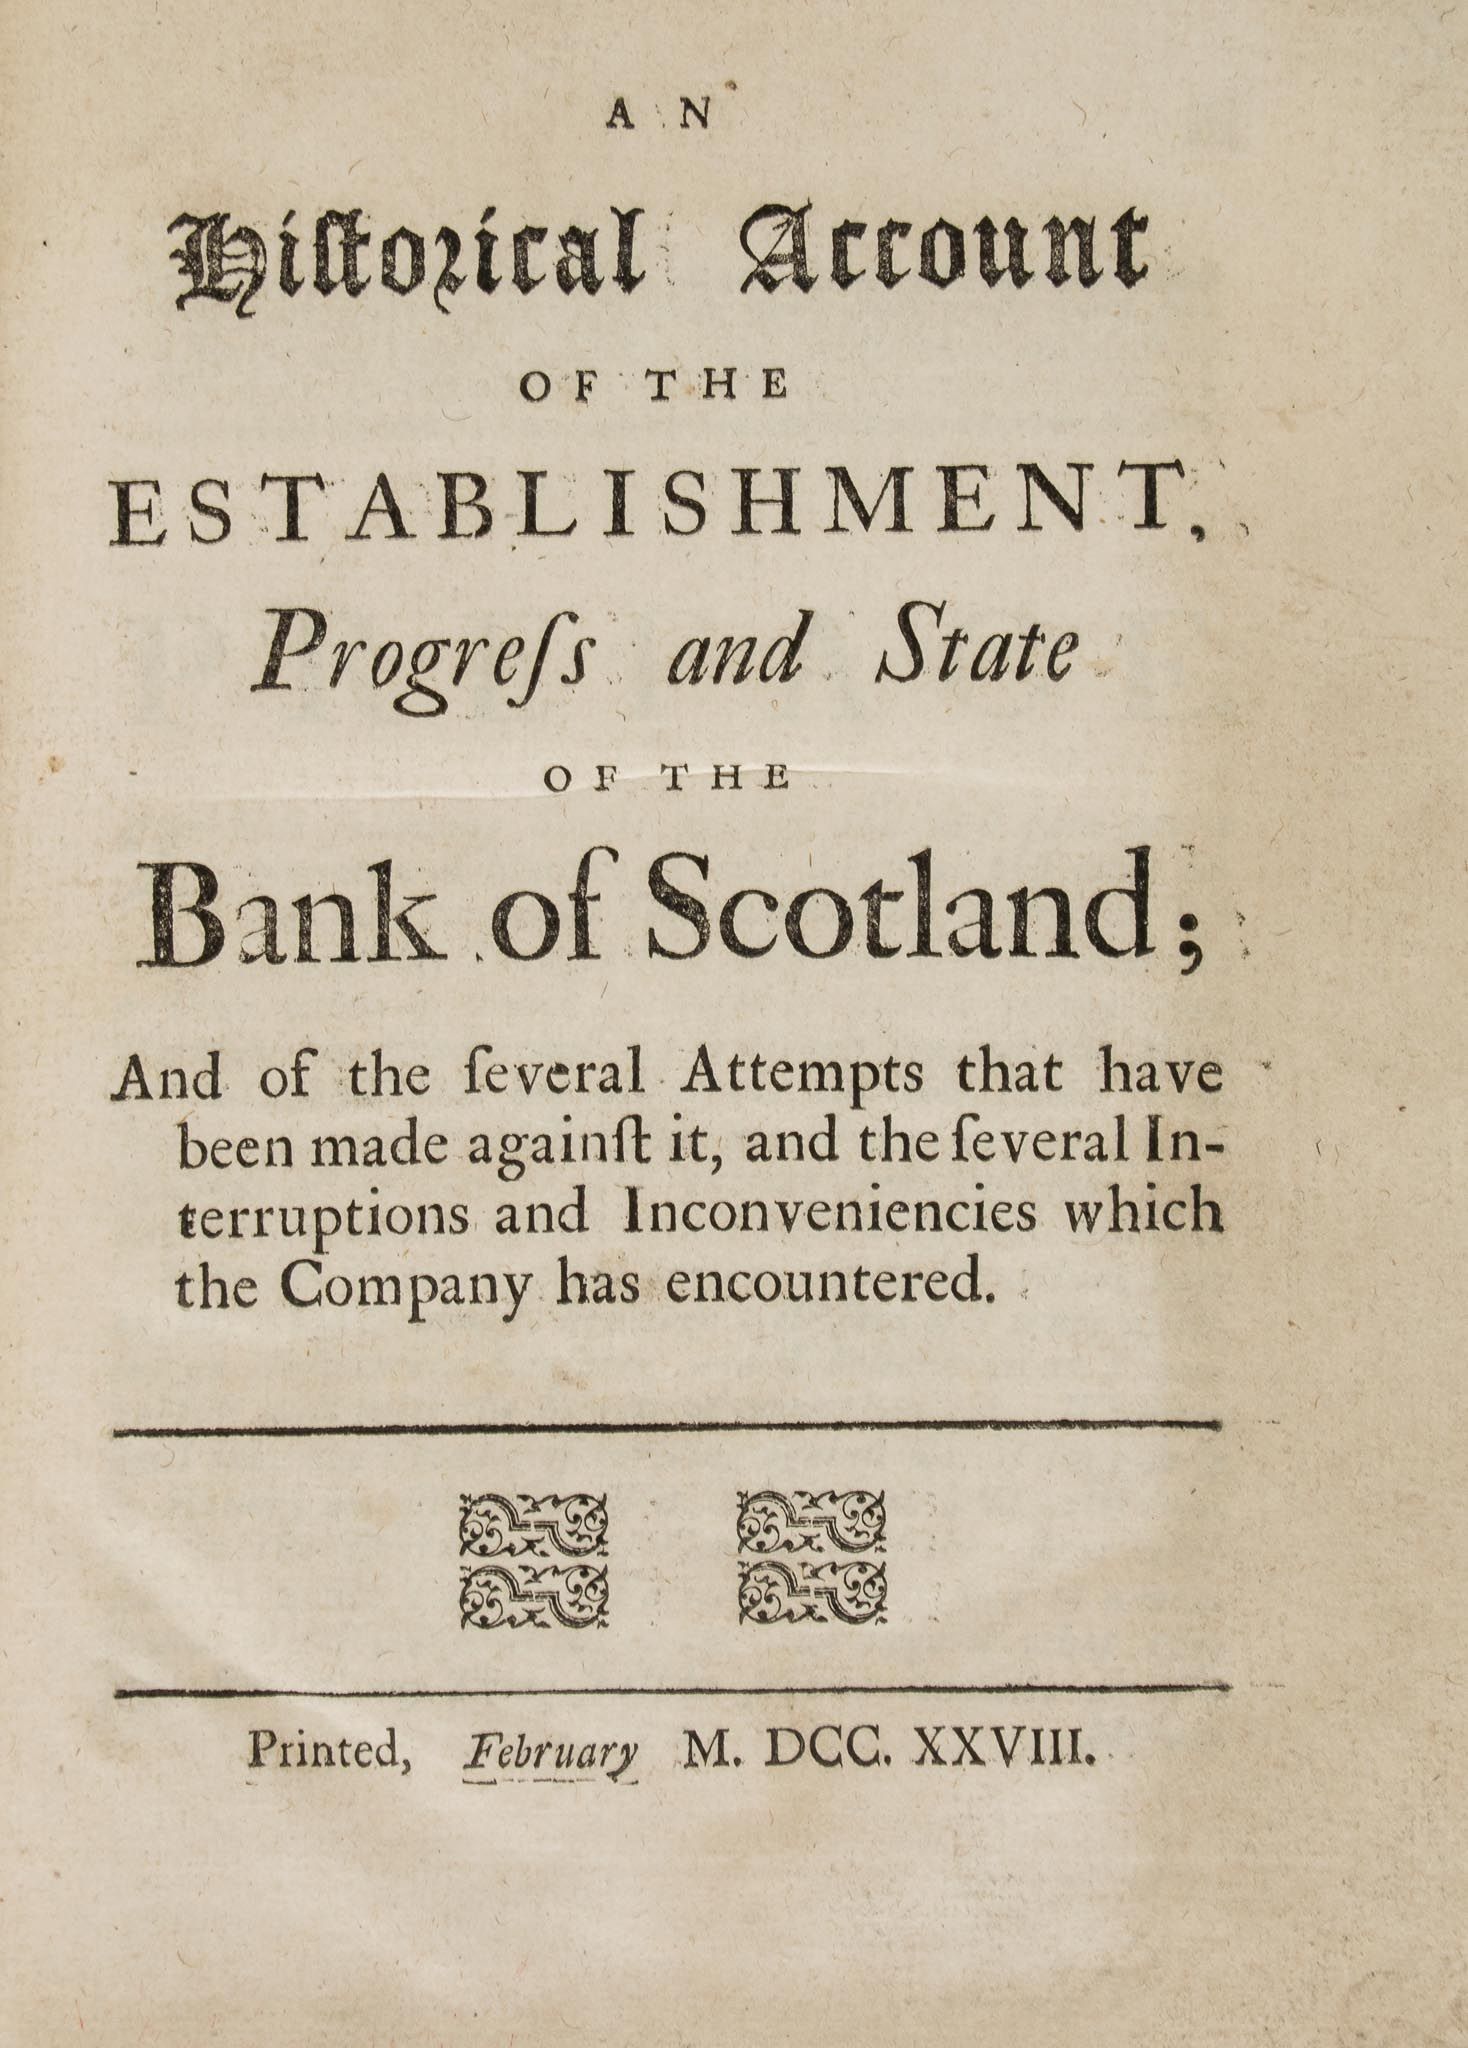 Pamphlets.- Bank of Scotland.- - Historical Account (An) of the Establishment, Progress and State of